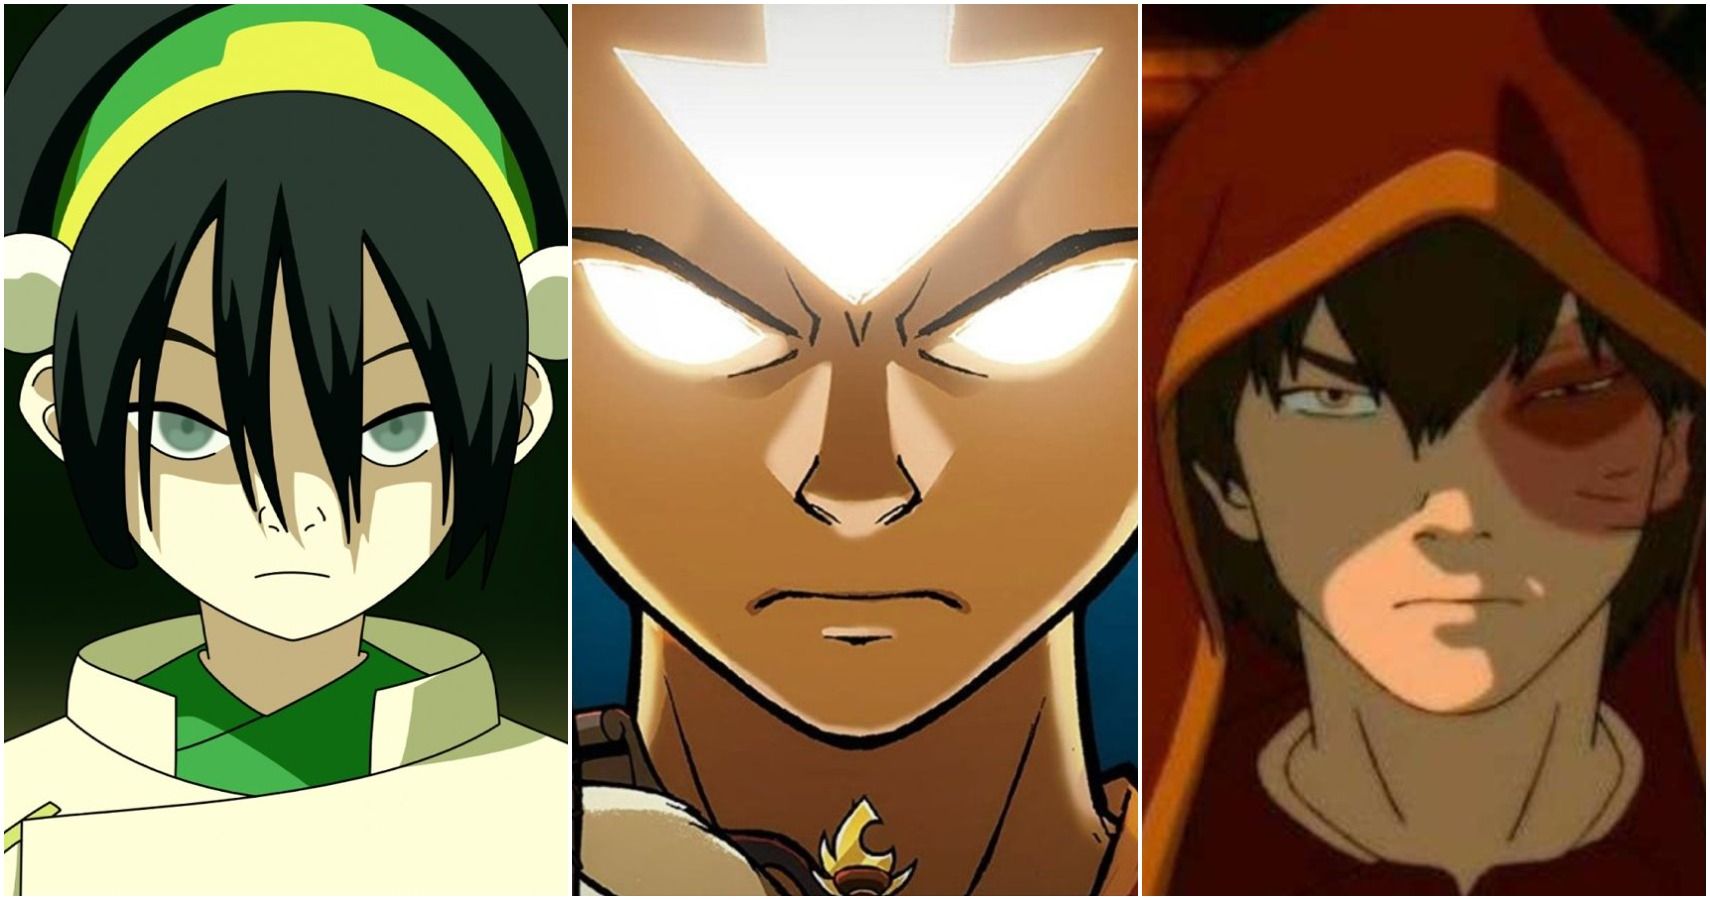 Avatar The Last Airbender: 10 Strange Things About The Show That Can't